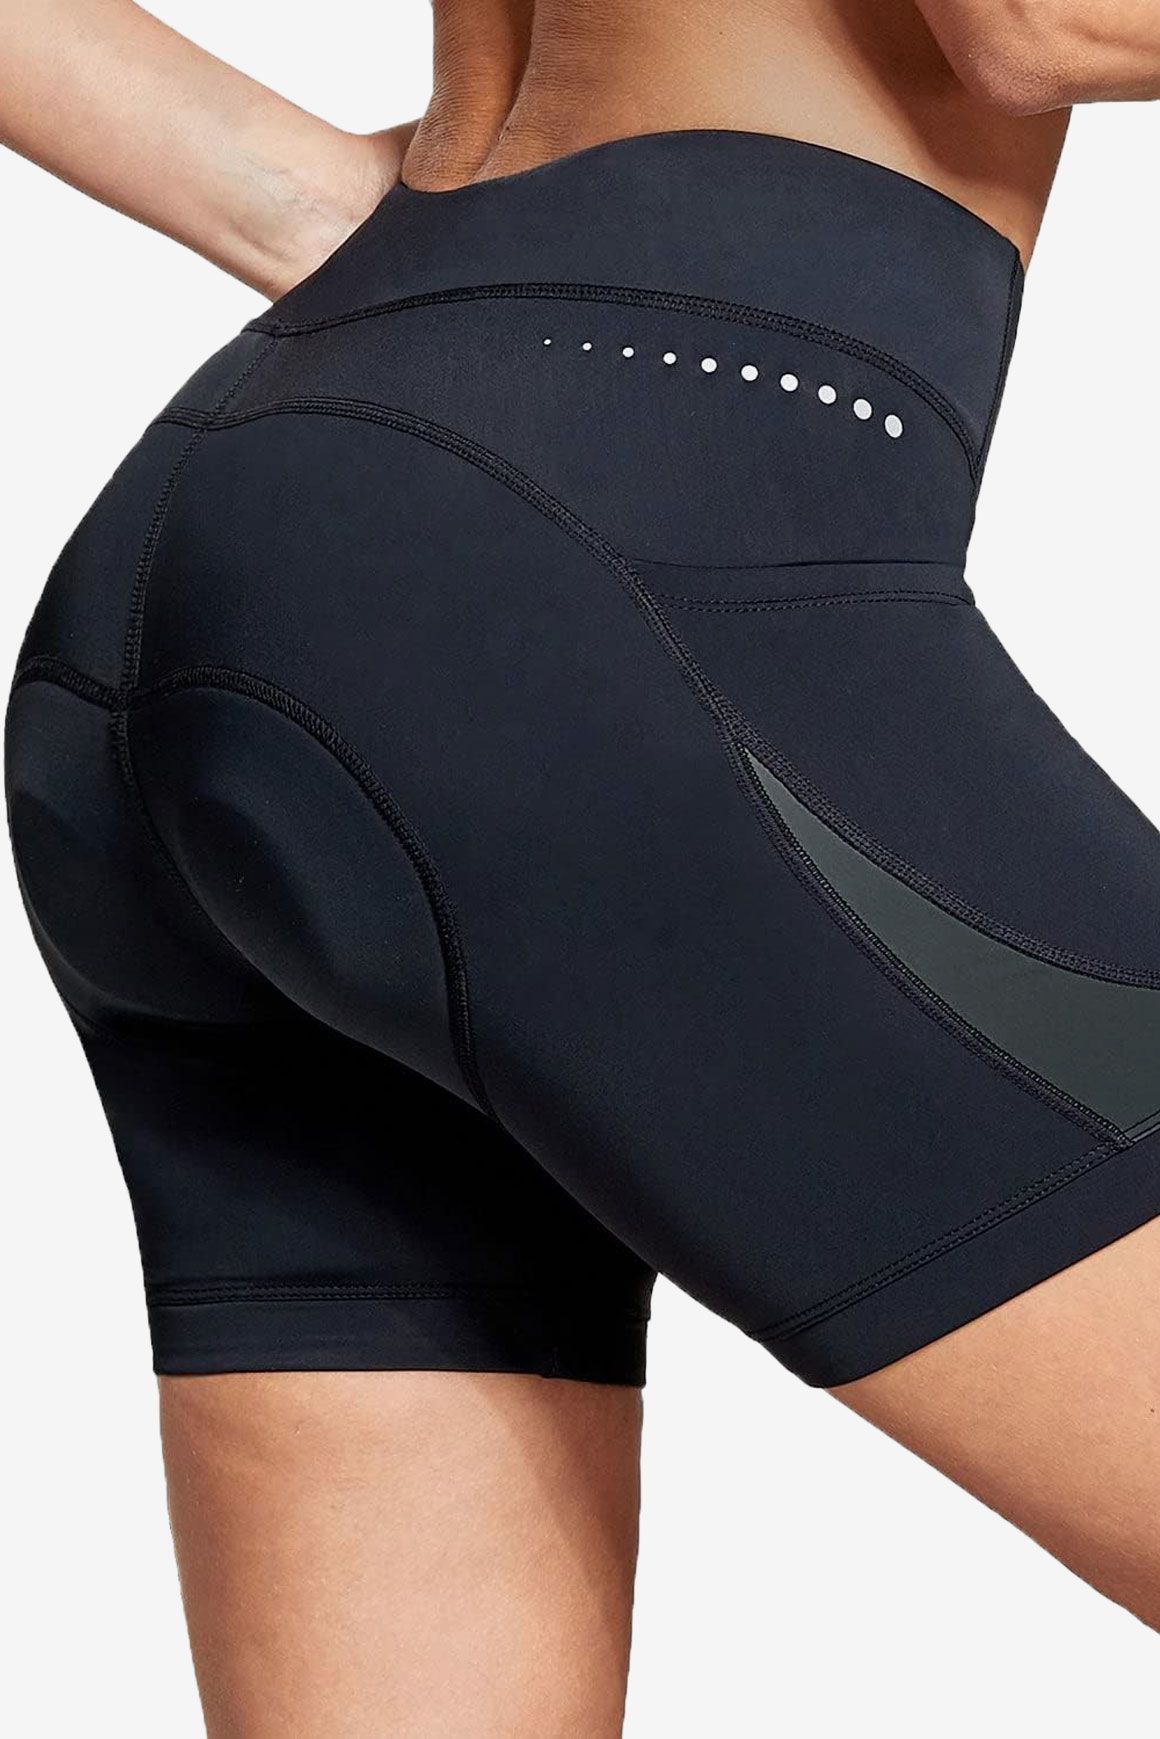 The Best Padded Cycling Shorts